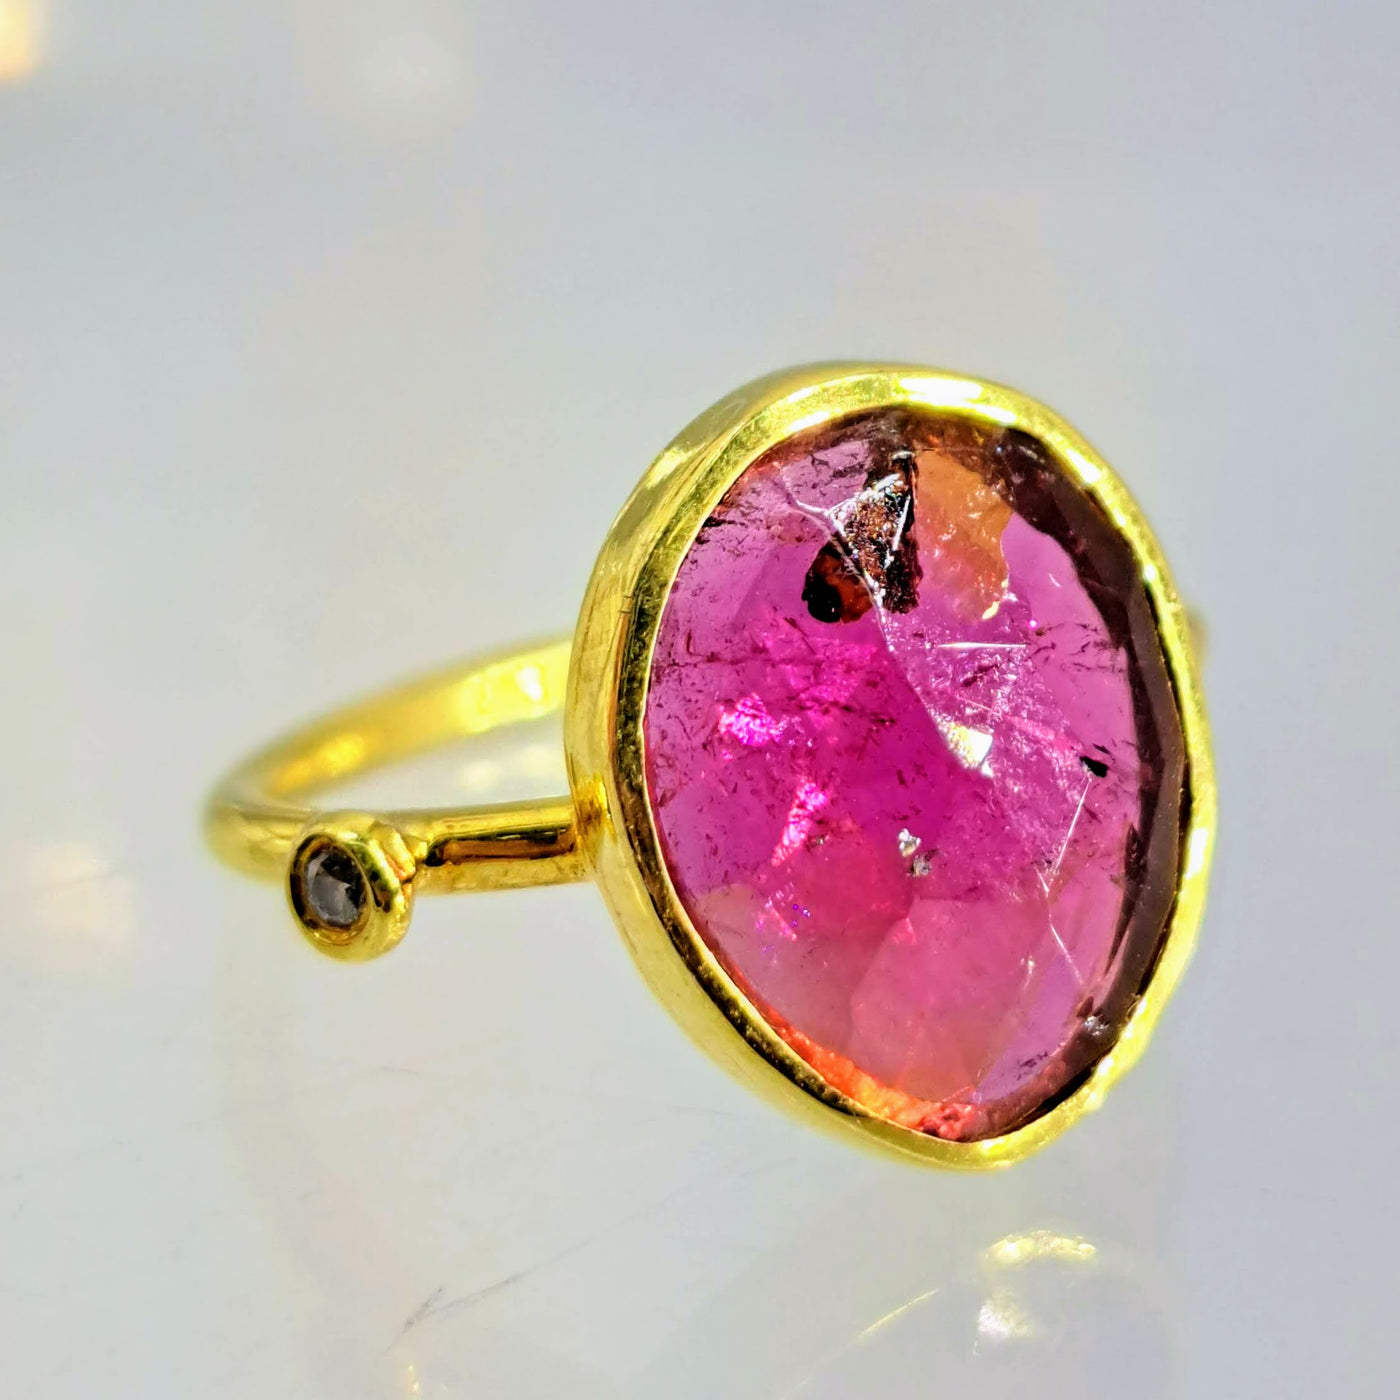 "Paint This Mother PINK!" Sz 7 Ring - Tourmaline, Diamond, 18K Gold Sterling